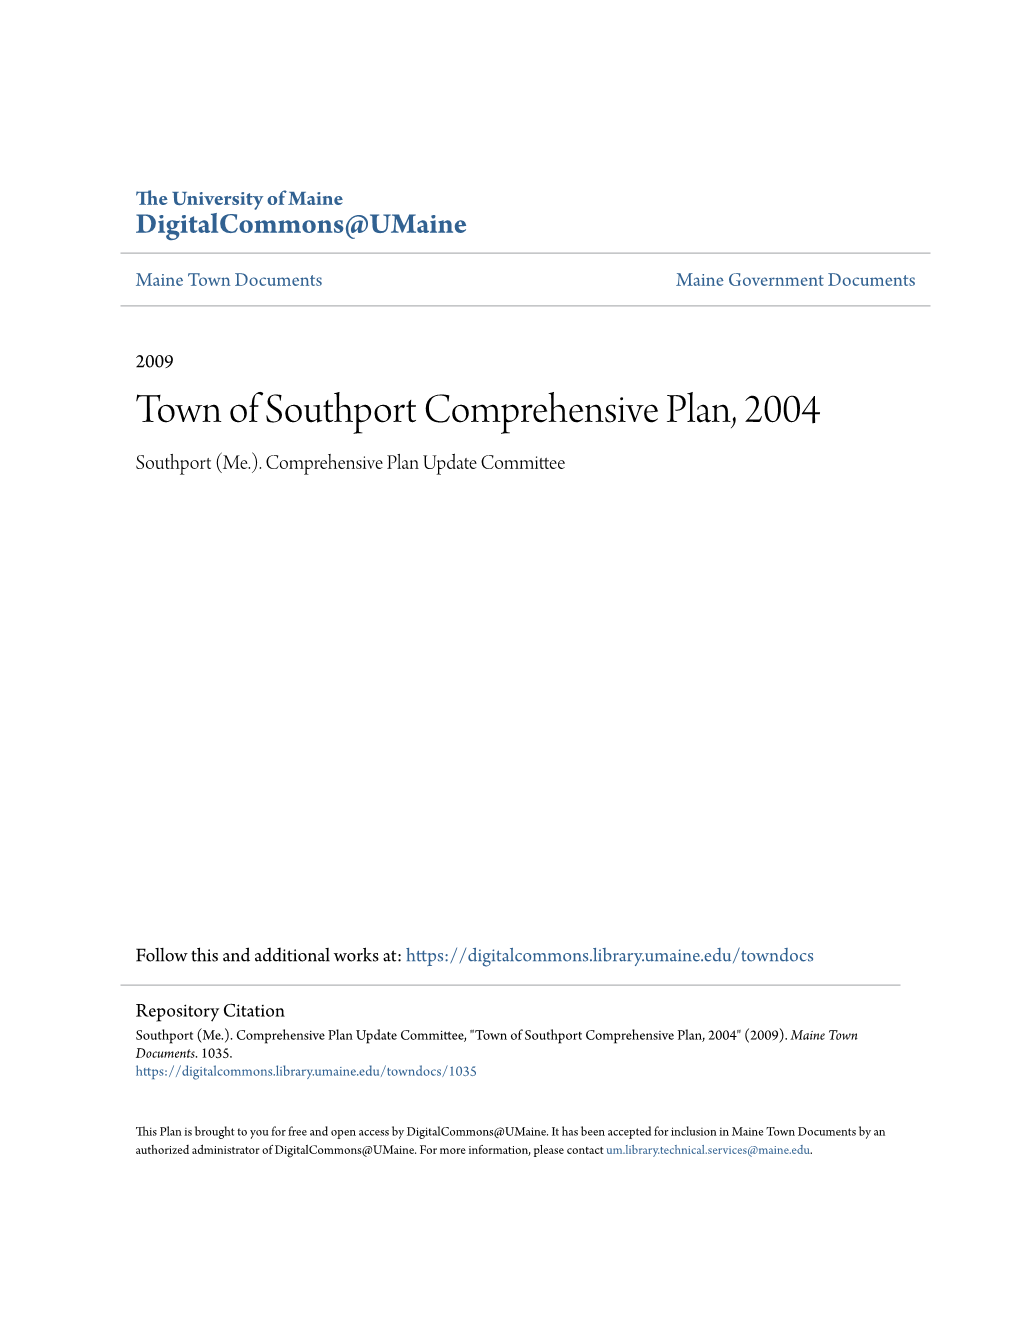 Town of Southport Comprehensive Plan, 2004 Southport (Me.)